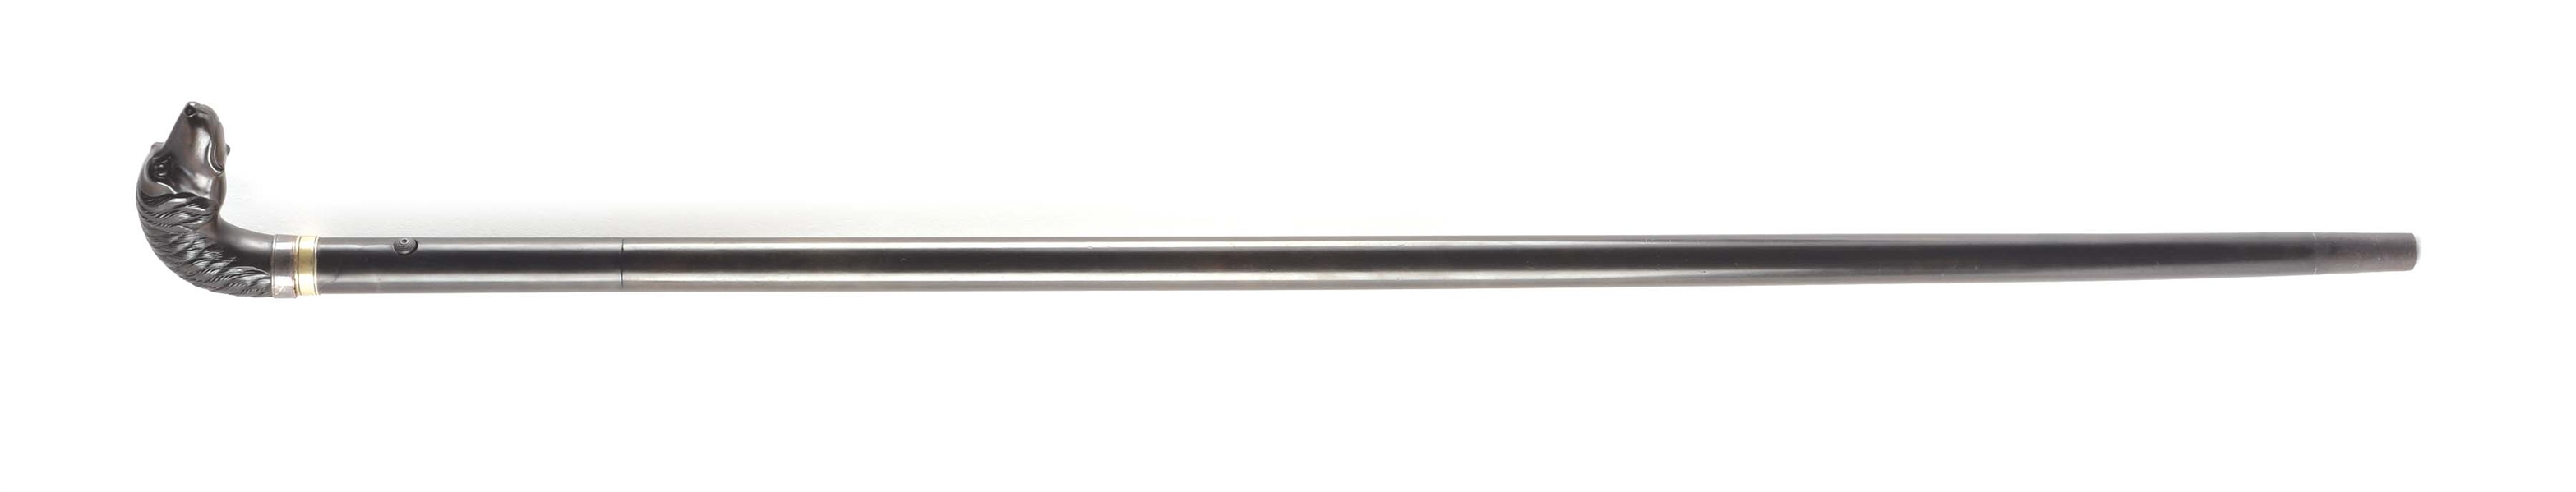 (C) A SCARCE AND DESIRABLE REMINGTON RIFLE CANE WITH THE DESIRABLE LARGE DOG HEAD HANDLE IN .32 RIMFIRE, CIRCA 1875.